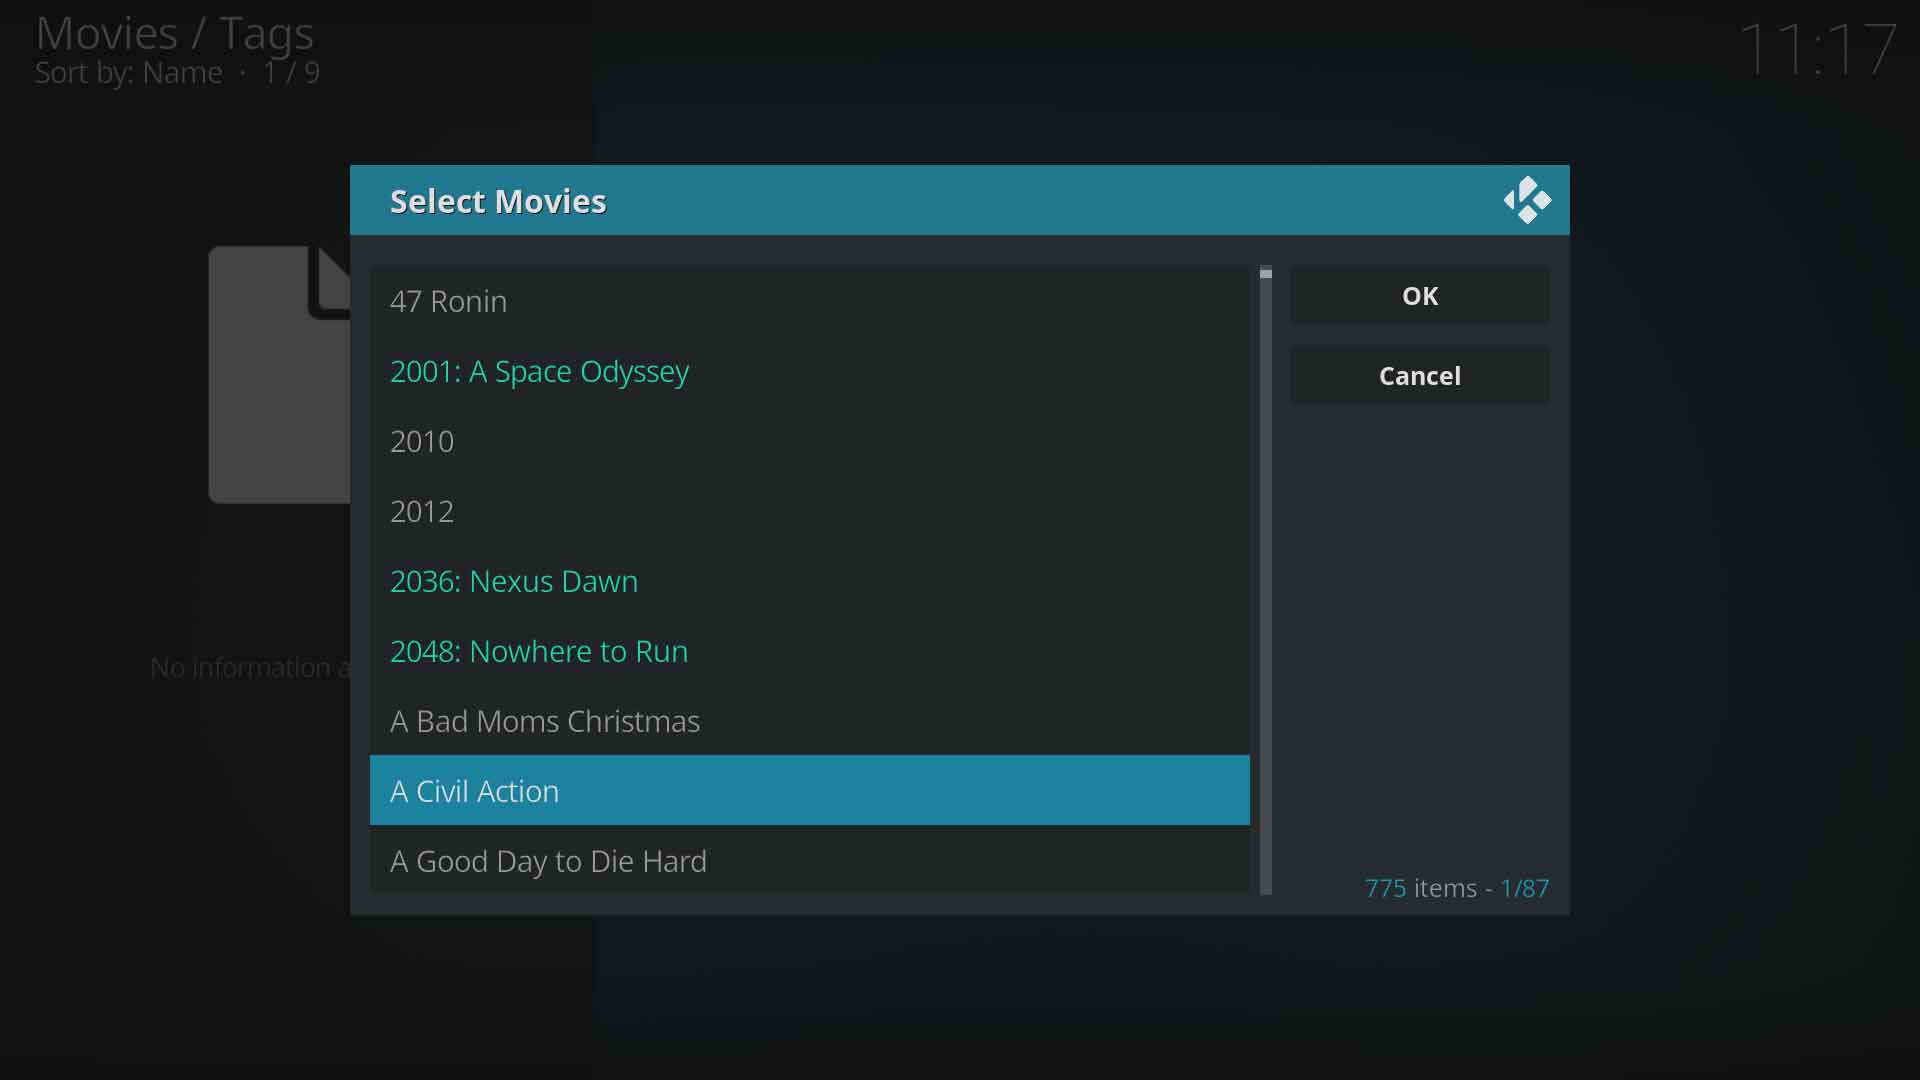 Image 5: From the pop-up Select Movies box, choose each movie to add to the list. Use ↵ Enter on a keyboard to select, then move to the next item. Press OK when finished.